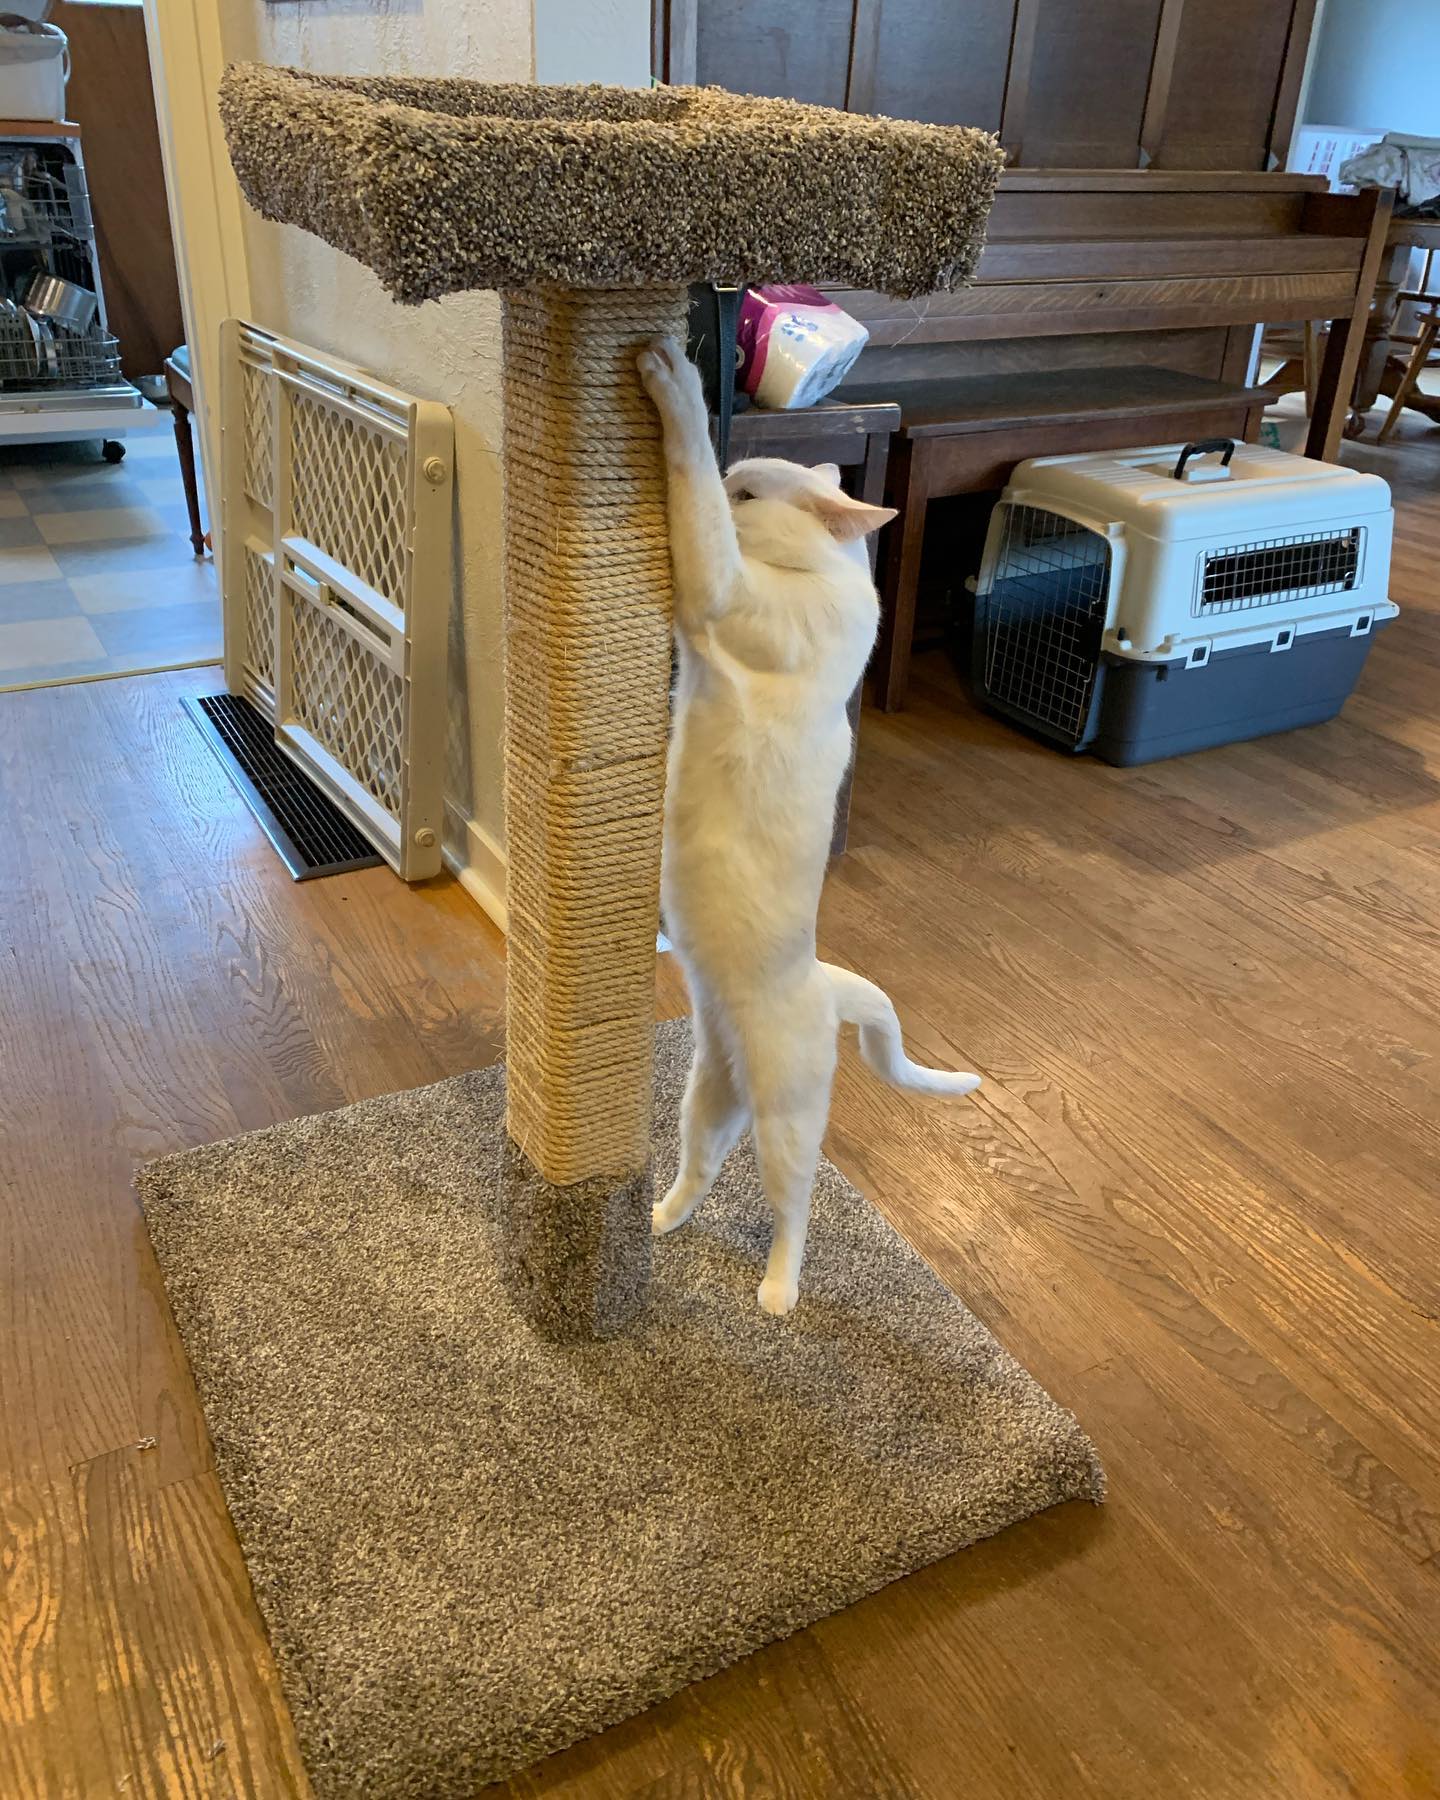 I made a thing! I wanted to get a new cat scratching post for @jon.snow.the.cat.yyj but anything tall enough for him was ridiculously expensive. This one I made from some scraps, about $45 in materials, and some donated carpet from a friend. I’m quite happy with how it turned out. #cattreesareexpensive #homemade #jonnylikesit #tallcat